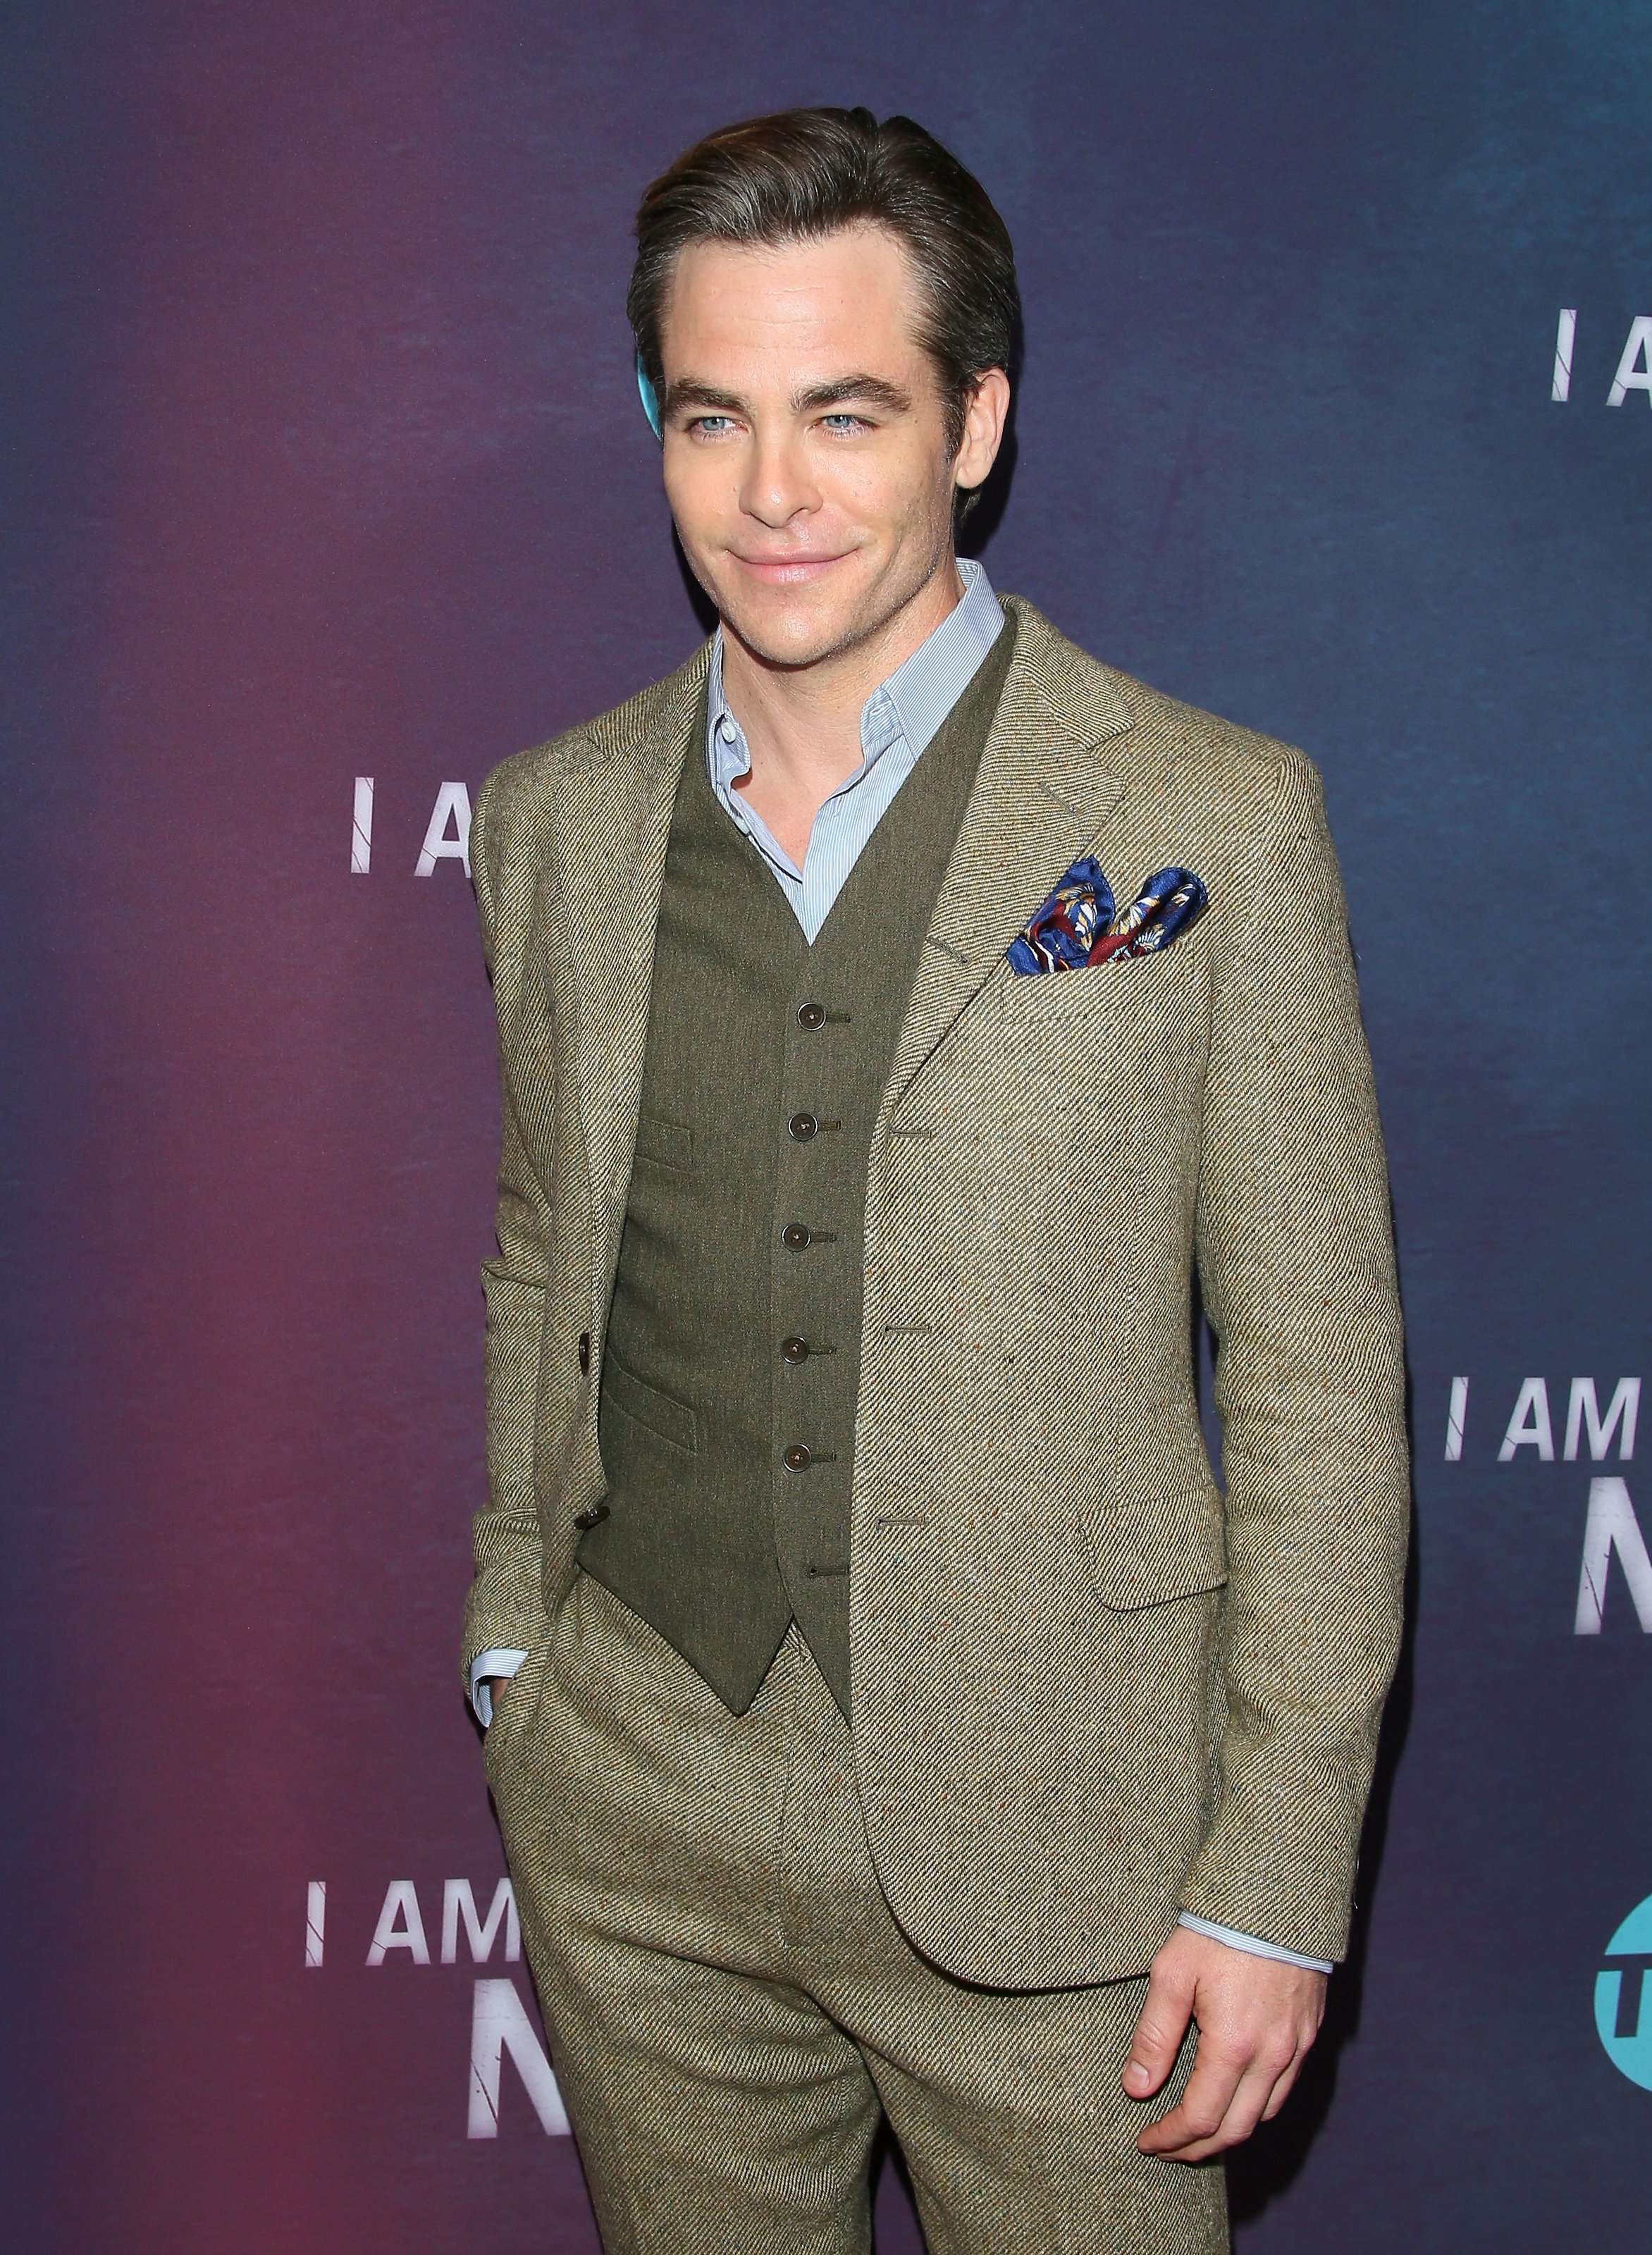 Chris Pine attends the Premiere Of TNT's 'I Am The Night' at Harmony Gold on January 24, 2019 in Los Angeles, California. | Source: Getty Images